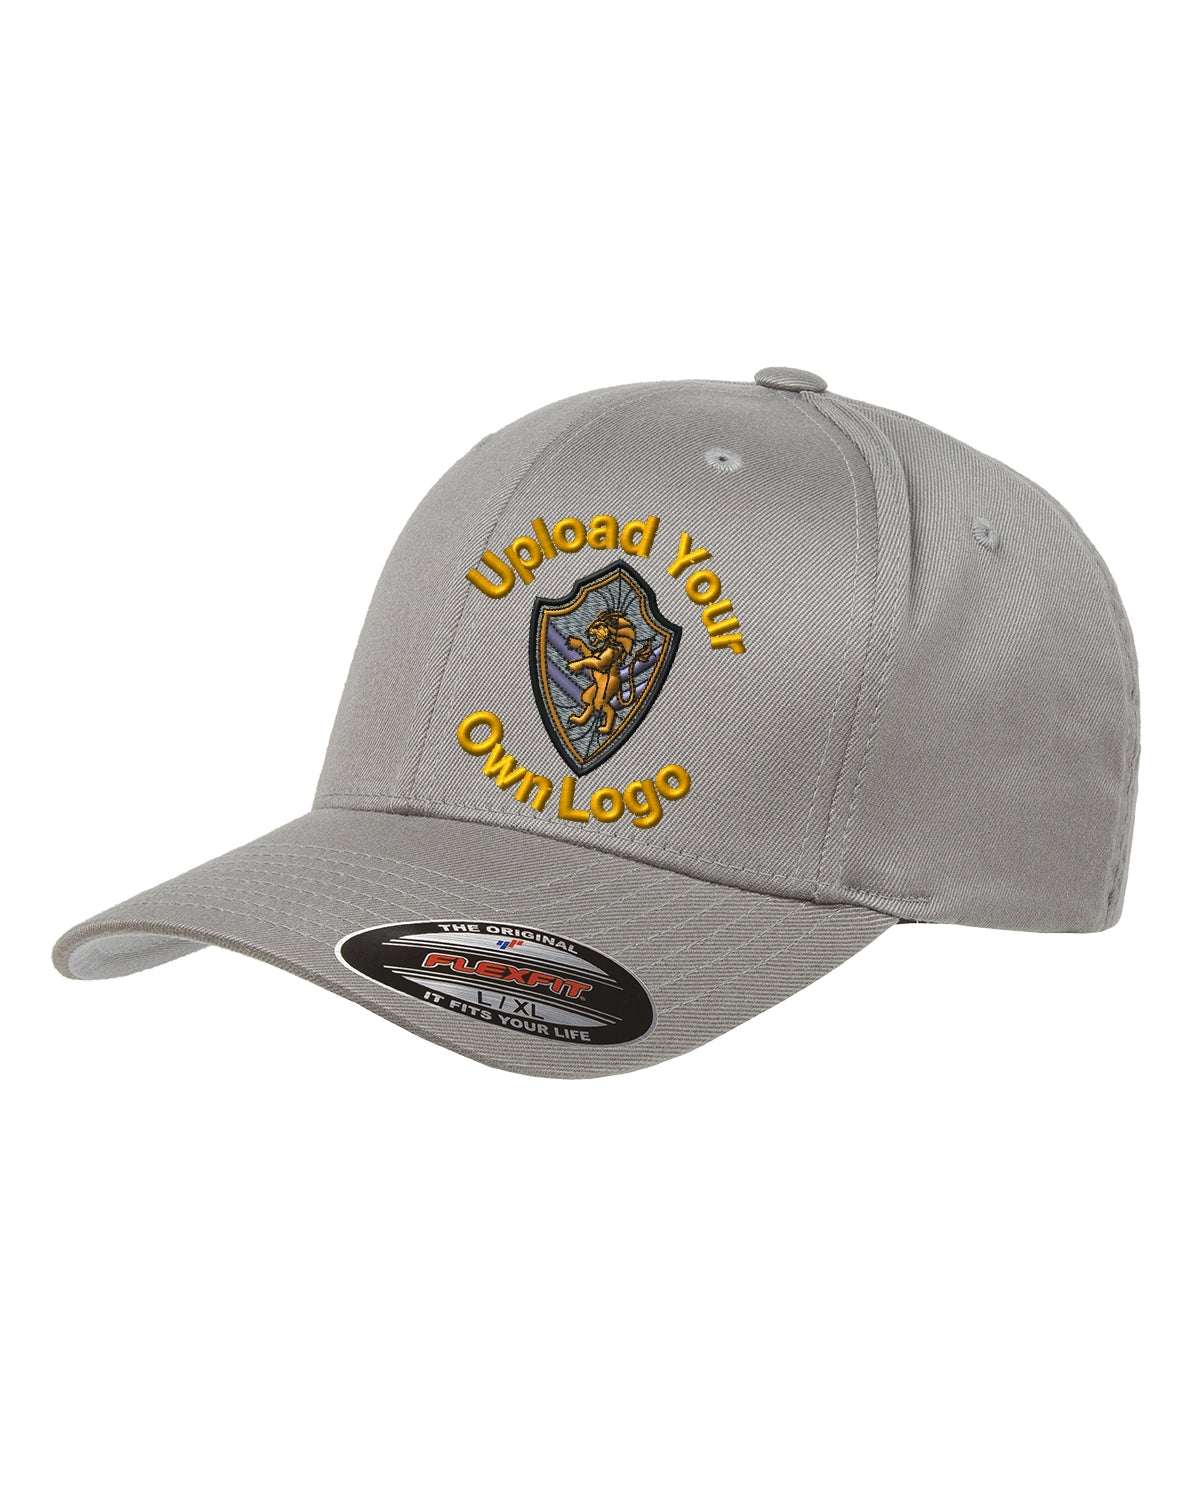 Flex Fitted Ball Cap with Your Company Logo Embroidered - gray